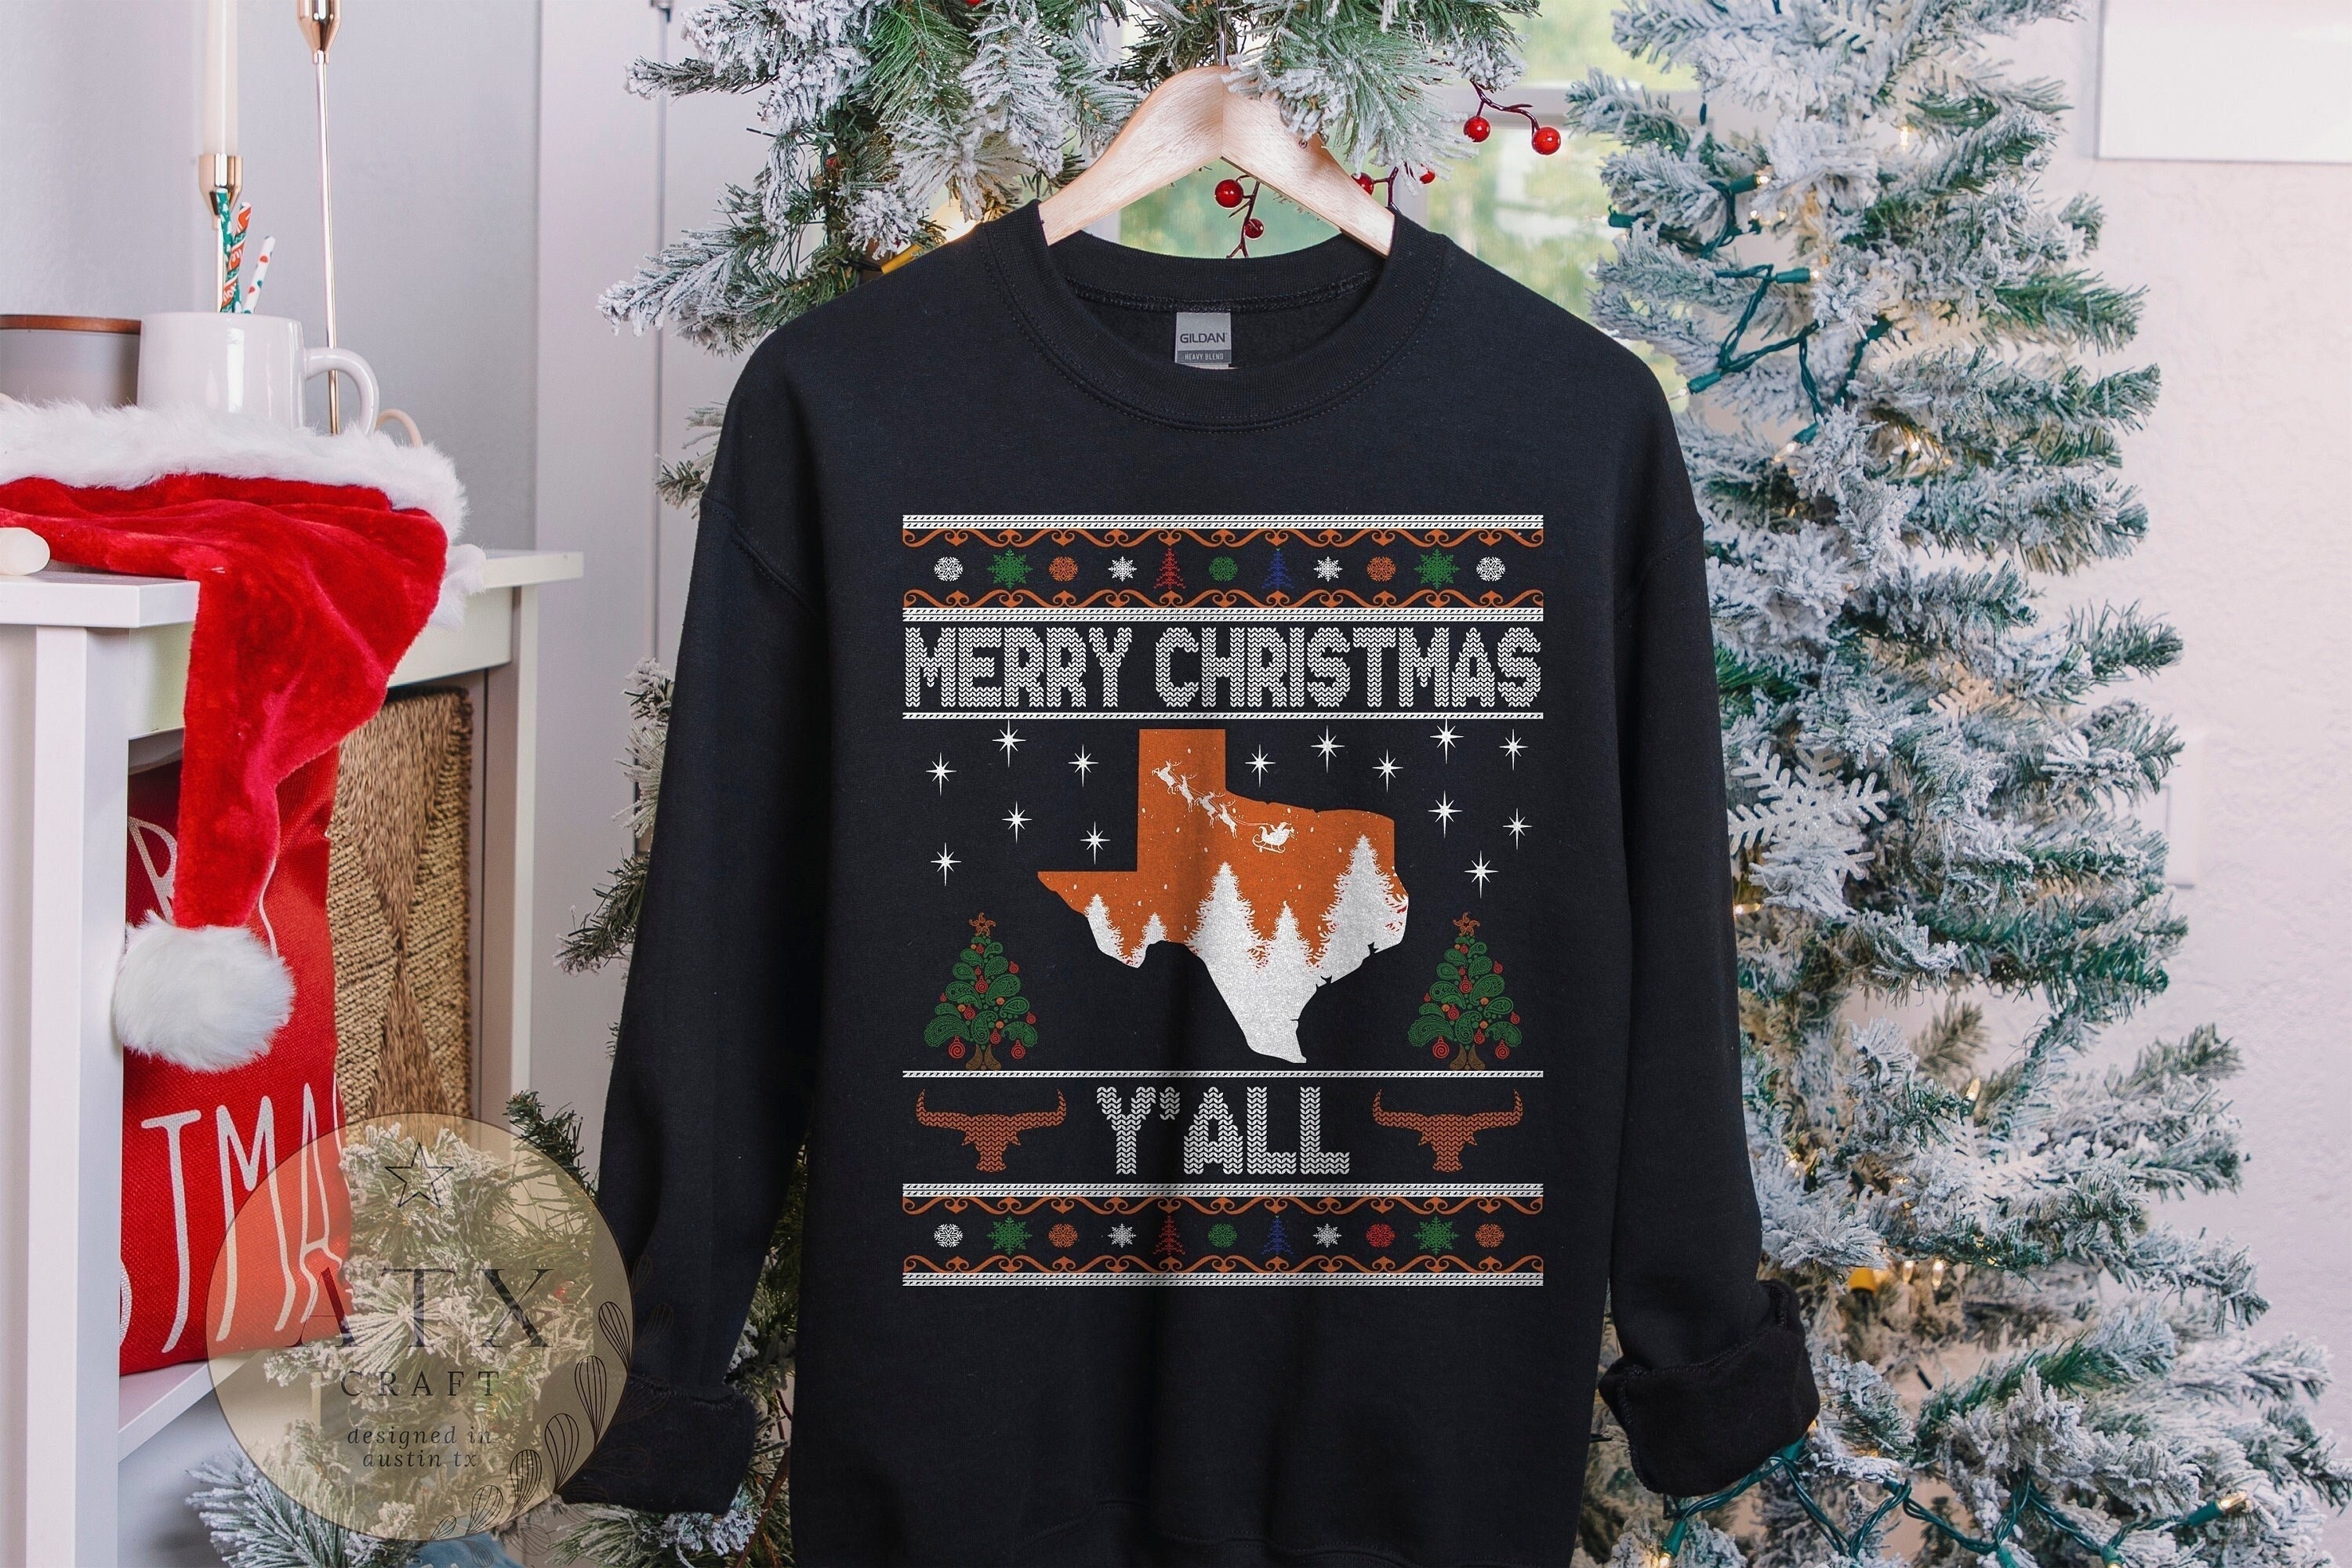 Two Dallas ugly Christmas sweater stores have a knit to pick with